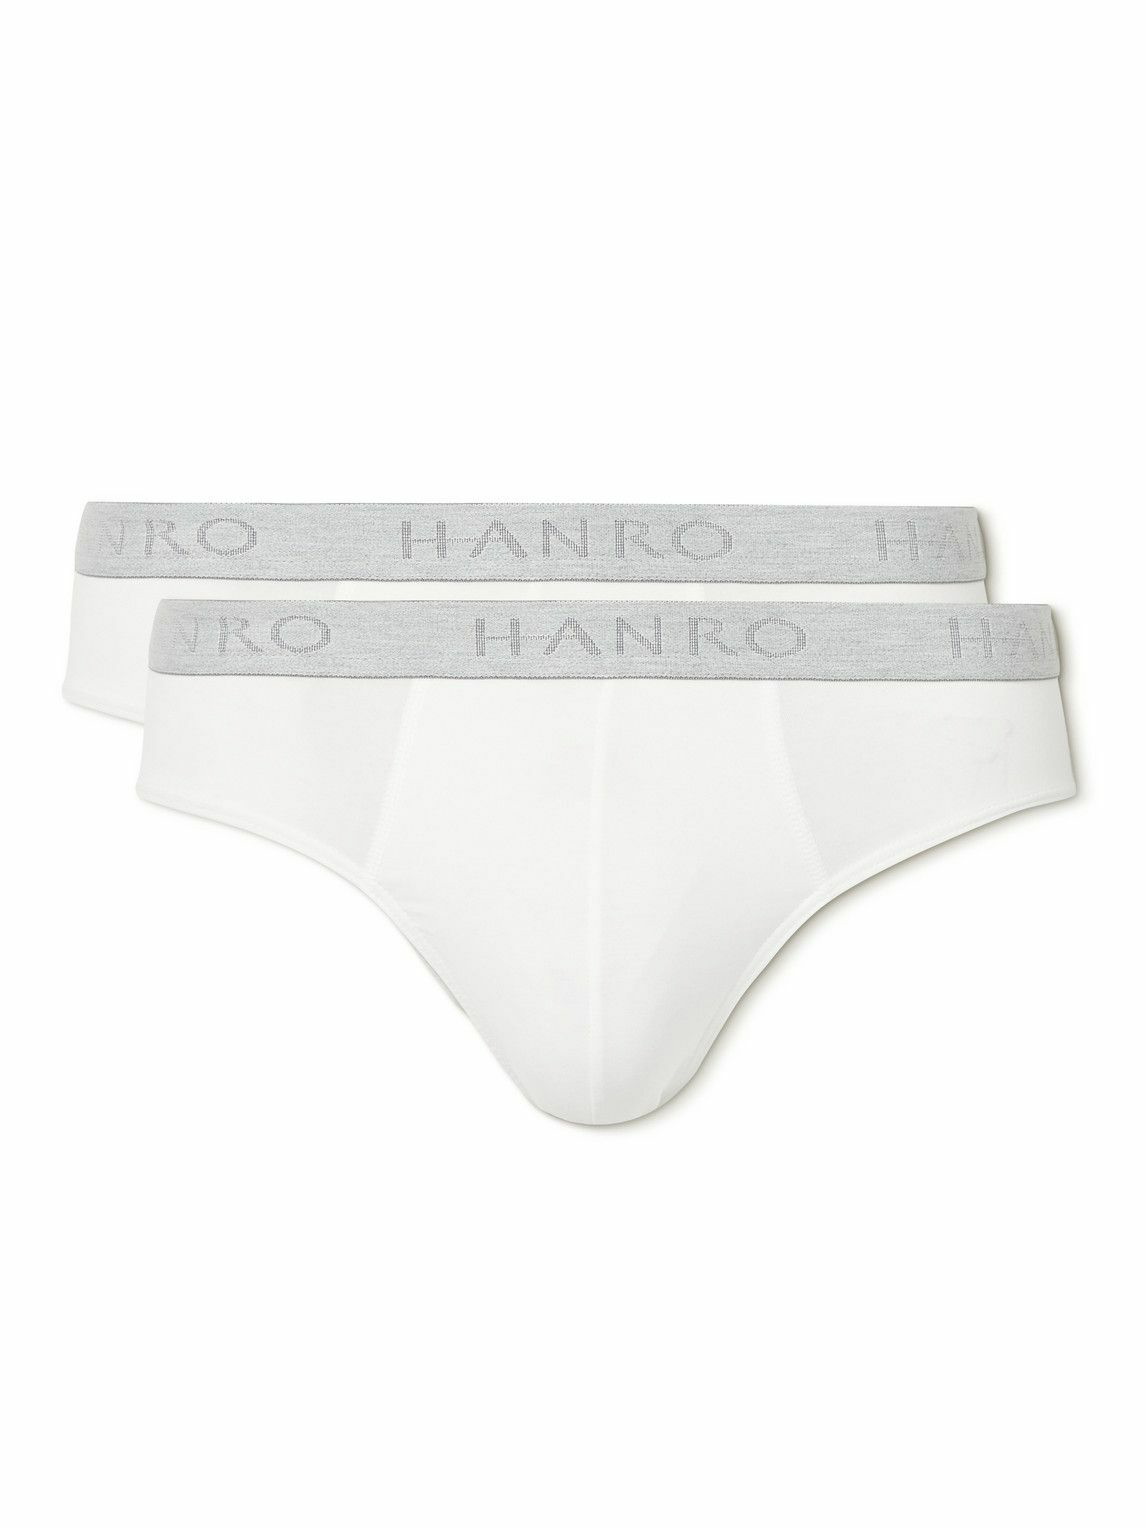 Black Pack of two cotton-blend briefs, Hanro